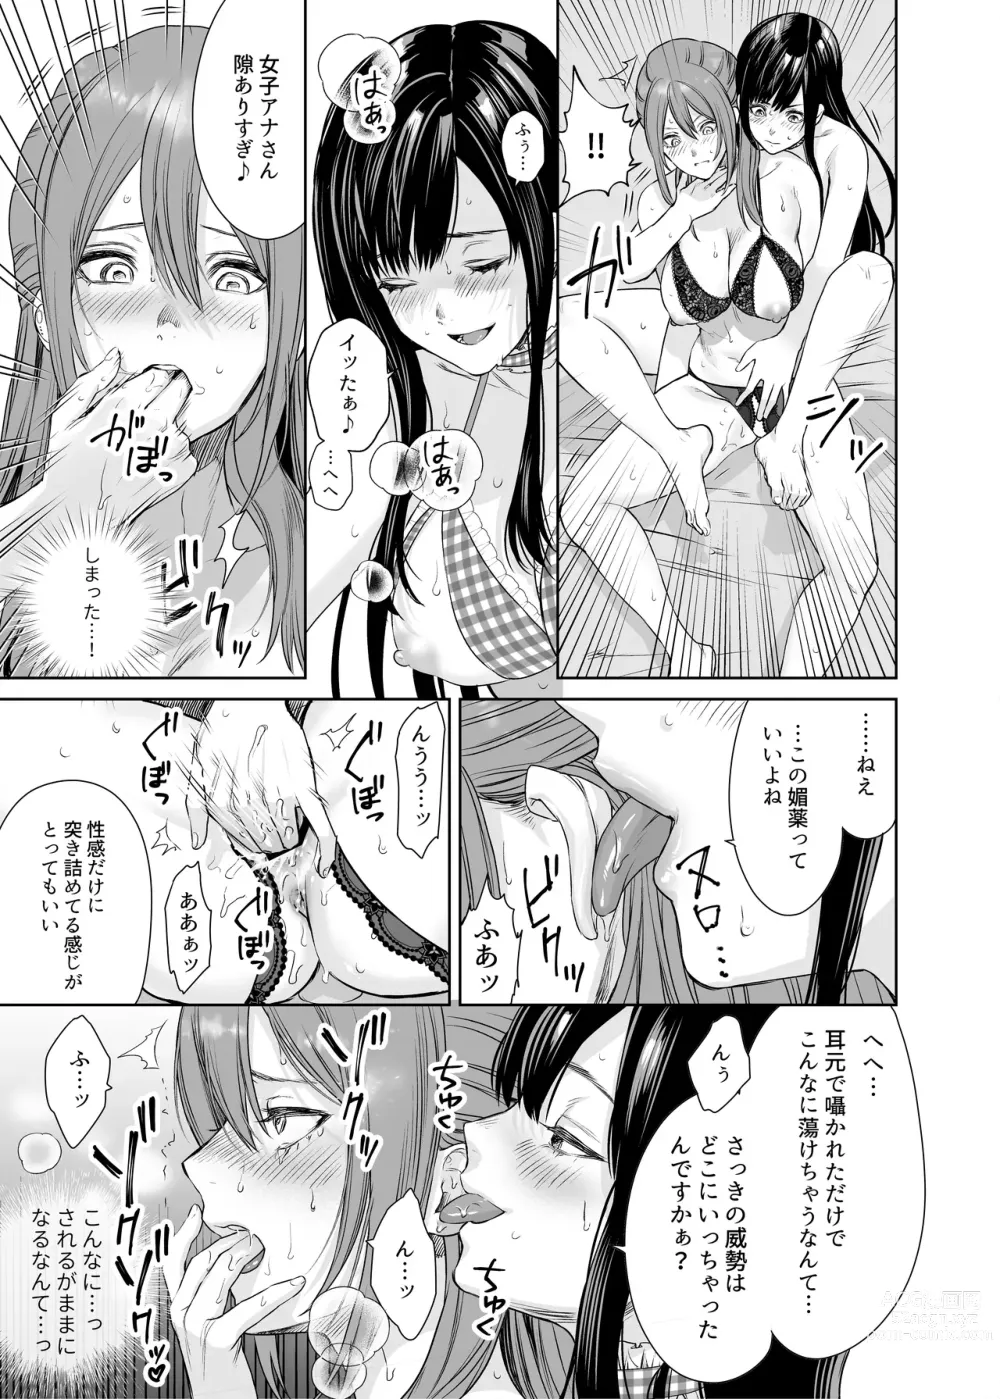 Page 19 of doujinshi LesFes Co Candid Reporting Vol. 004